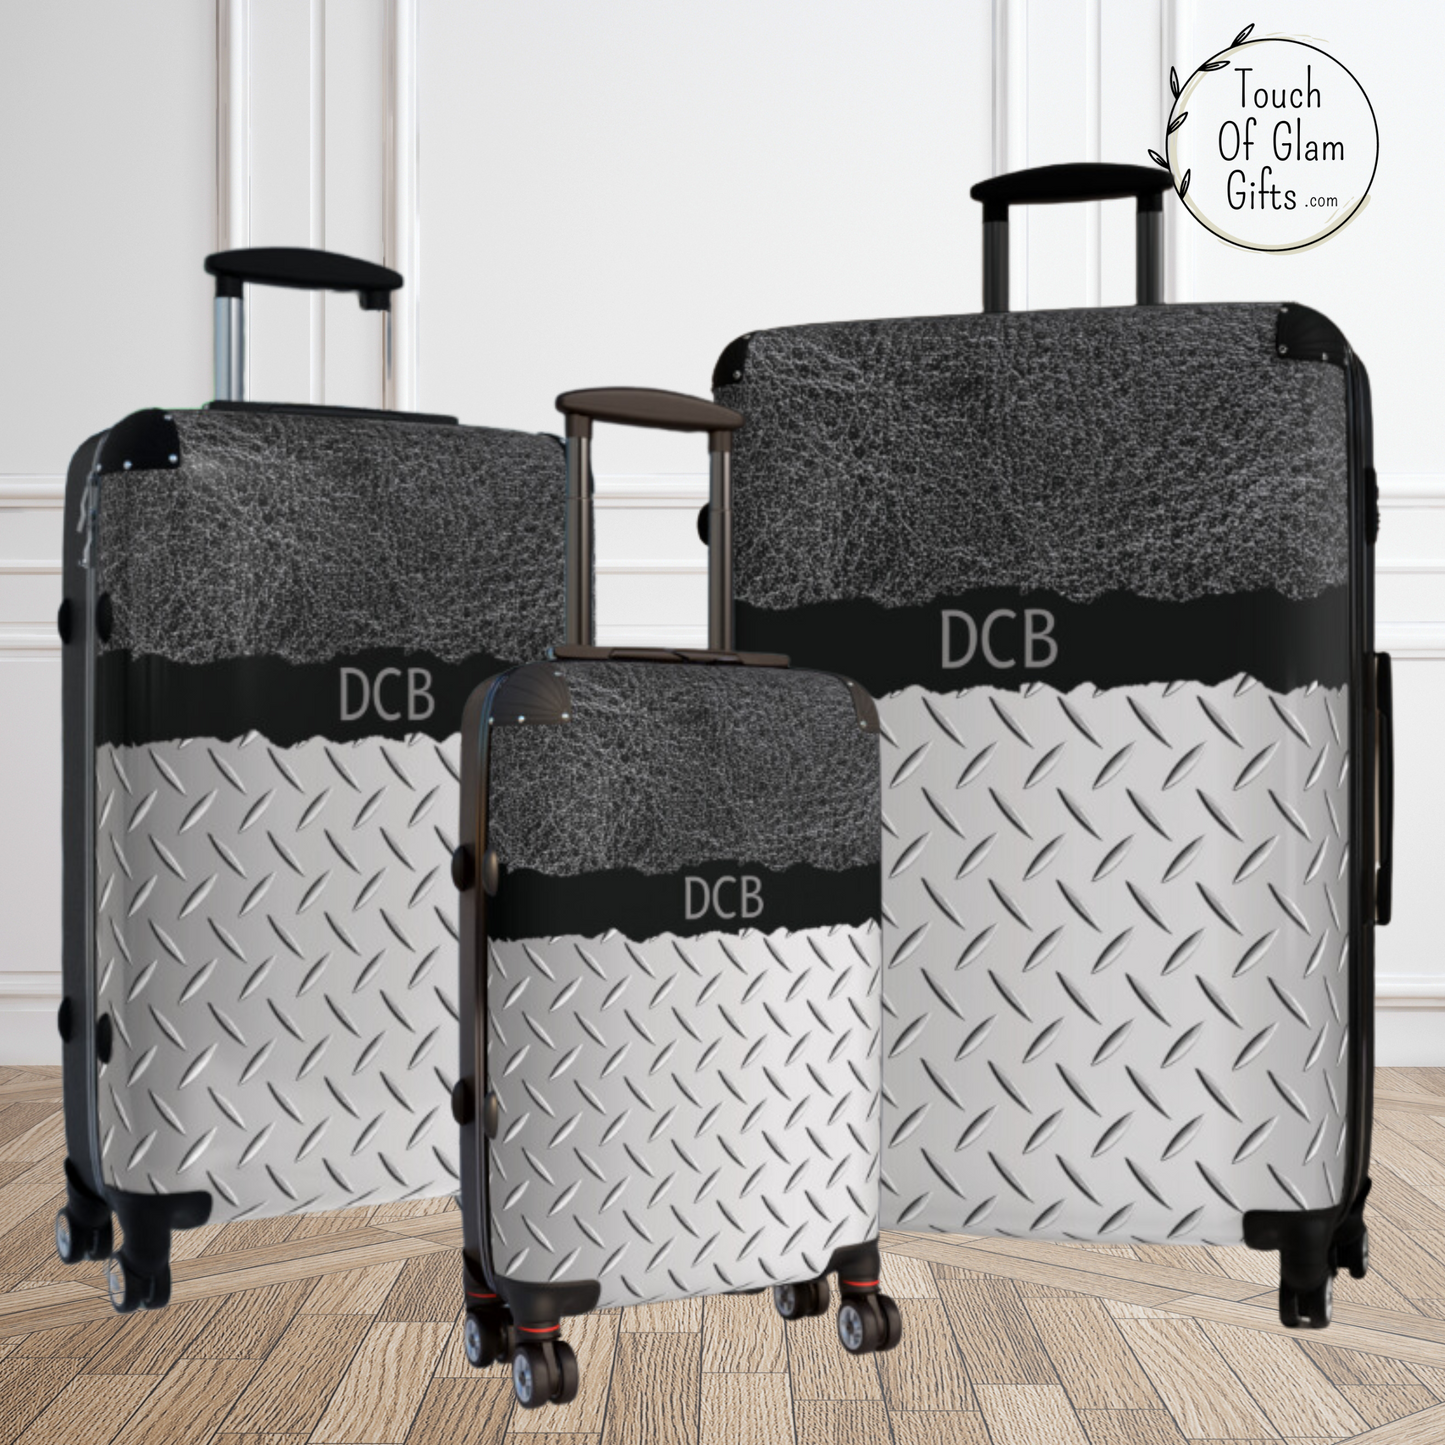 Custom Monogramed Luggage For Men #4, Grey Leather & Silver Metal With Custom Initials